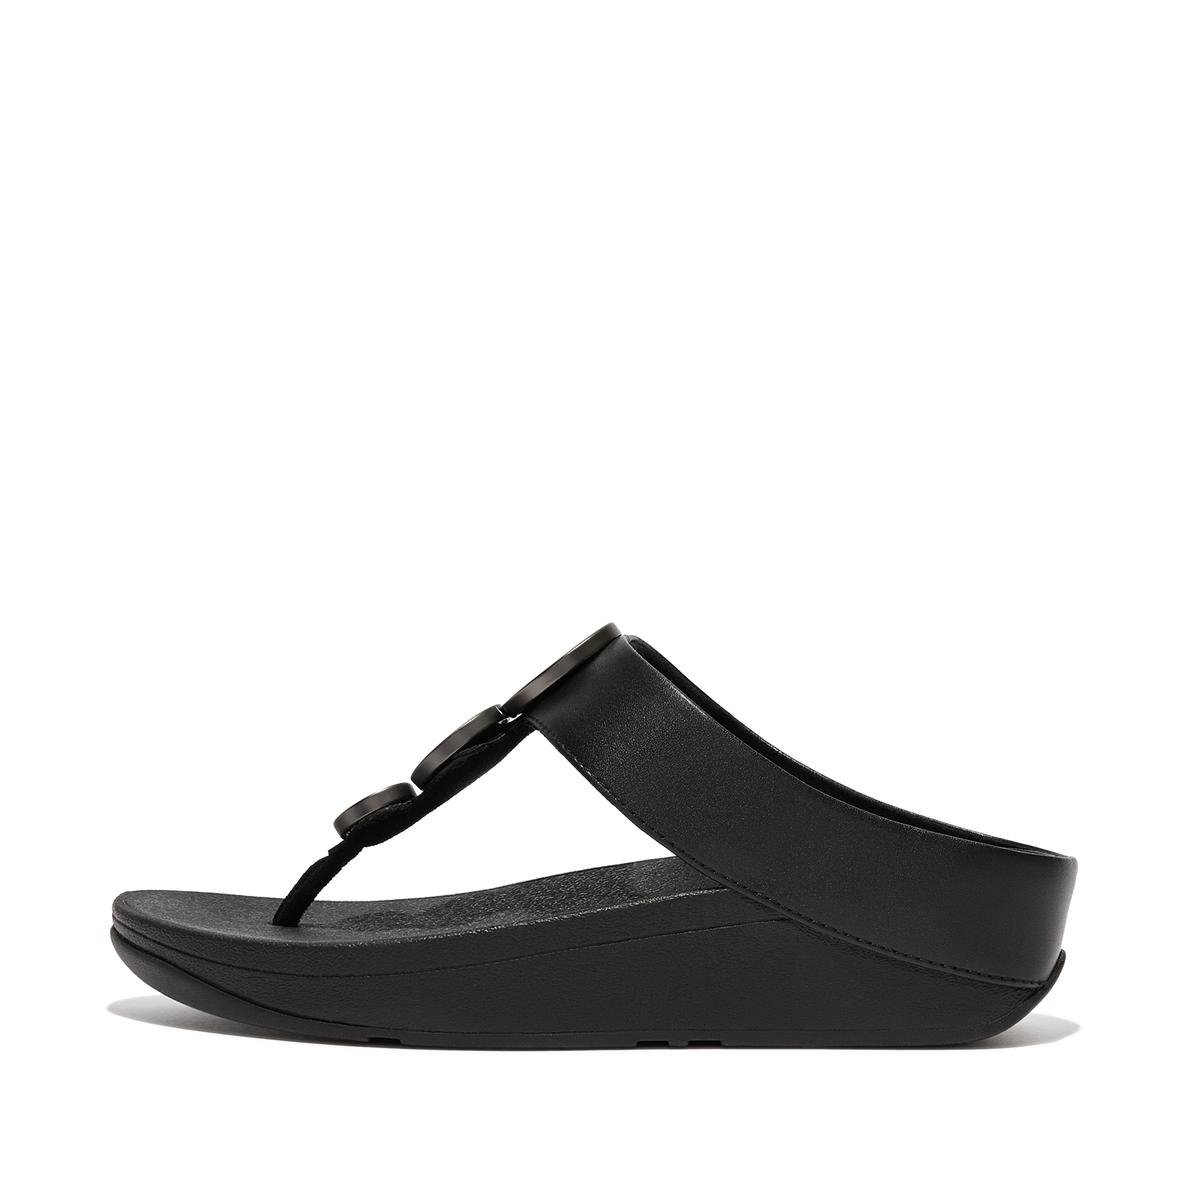 Buy Fitflop Products Online in India | Myntra